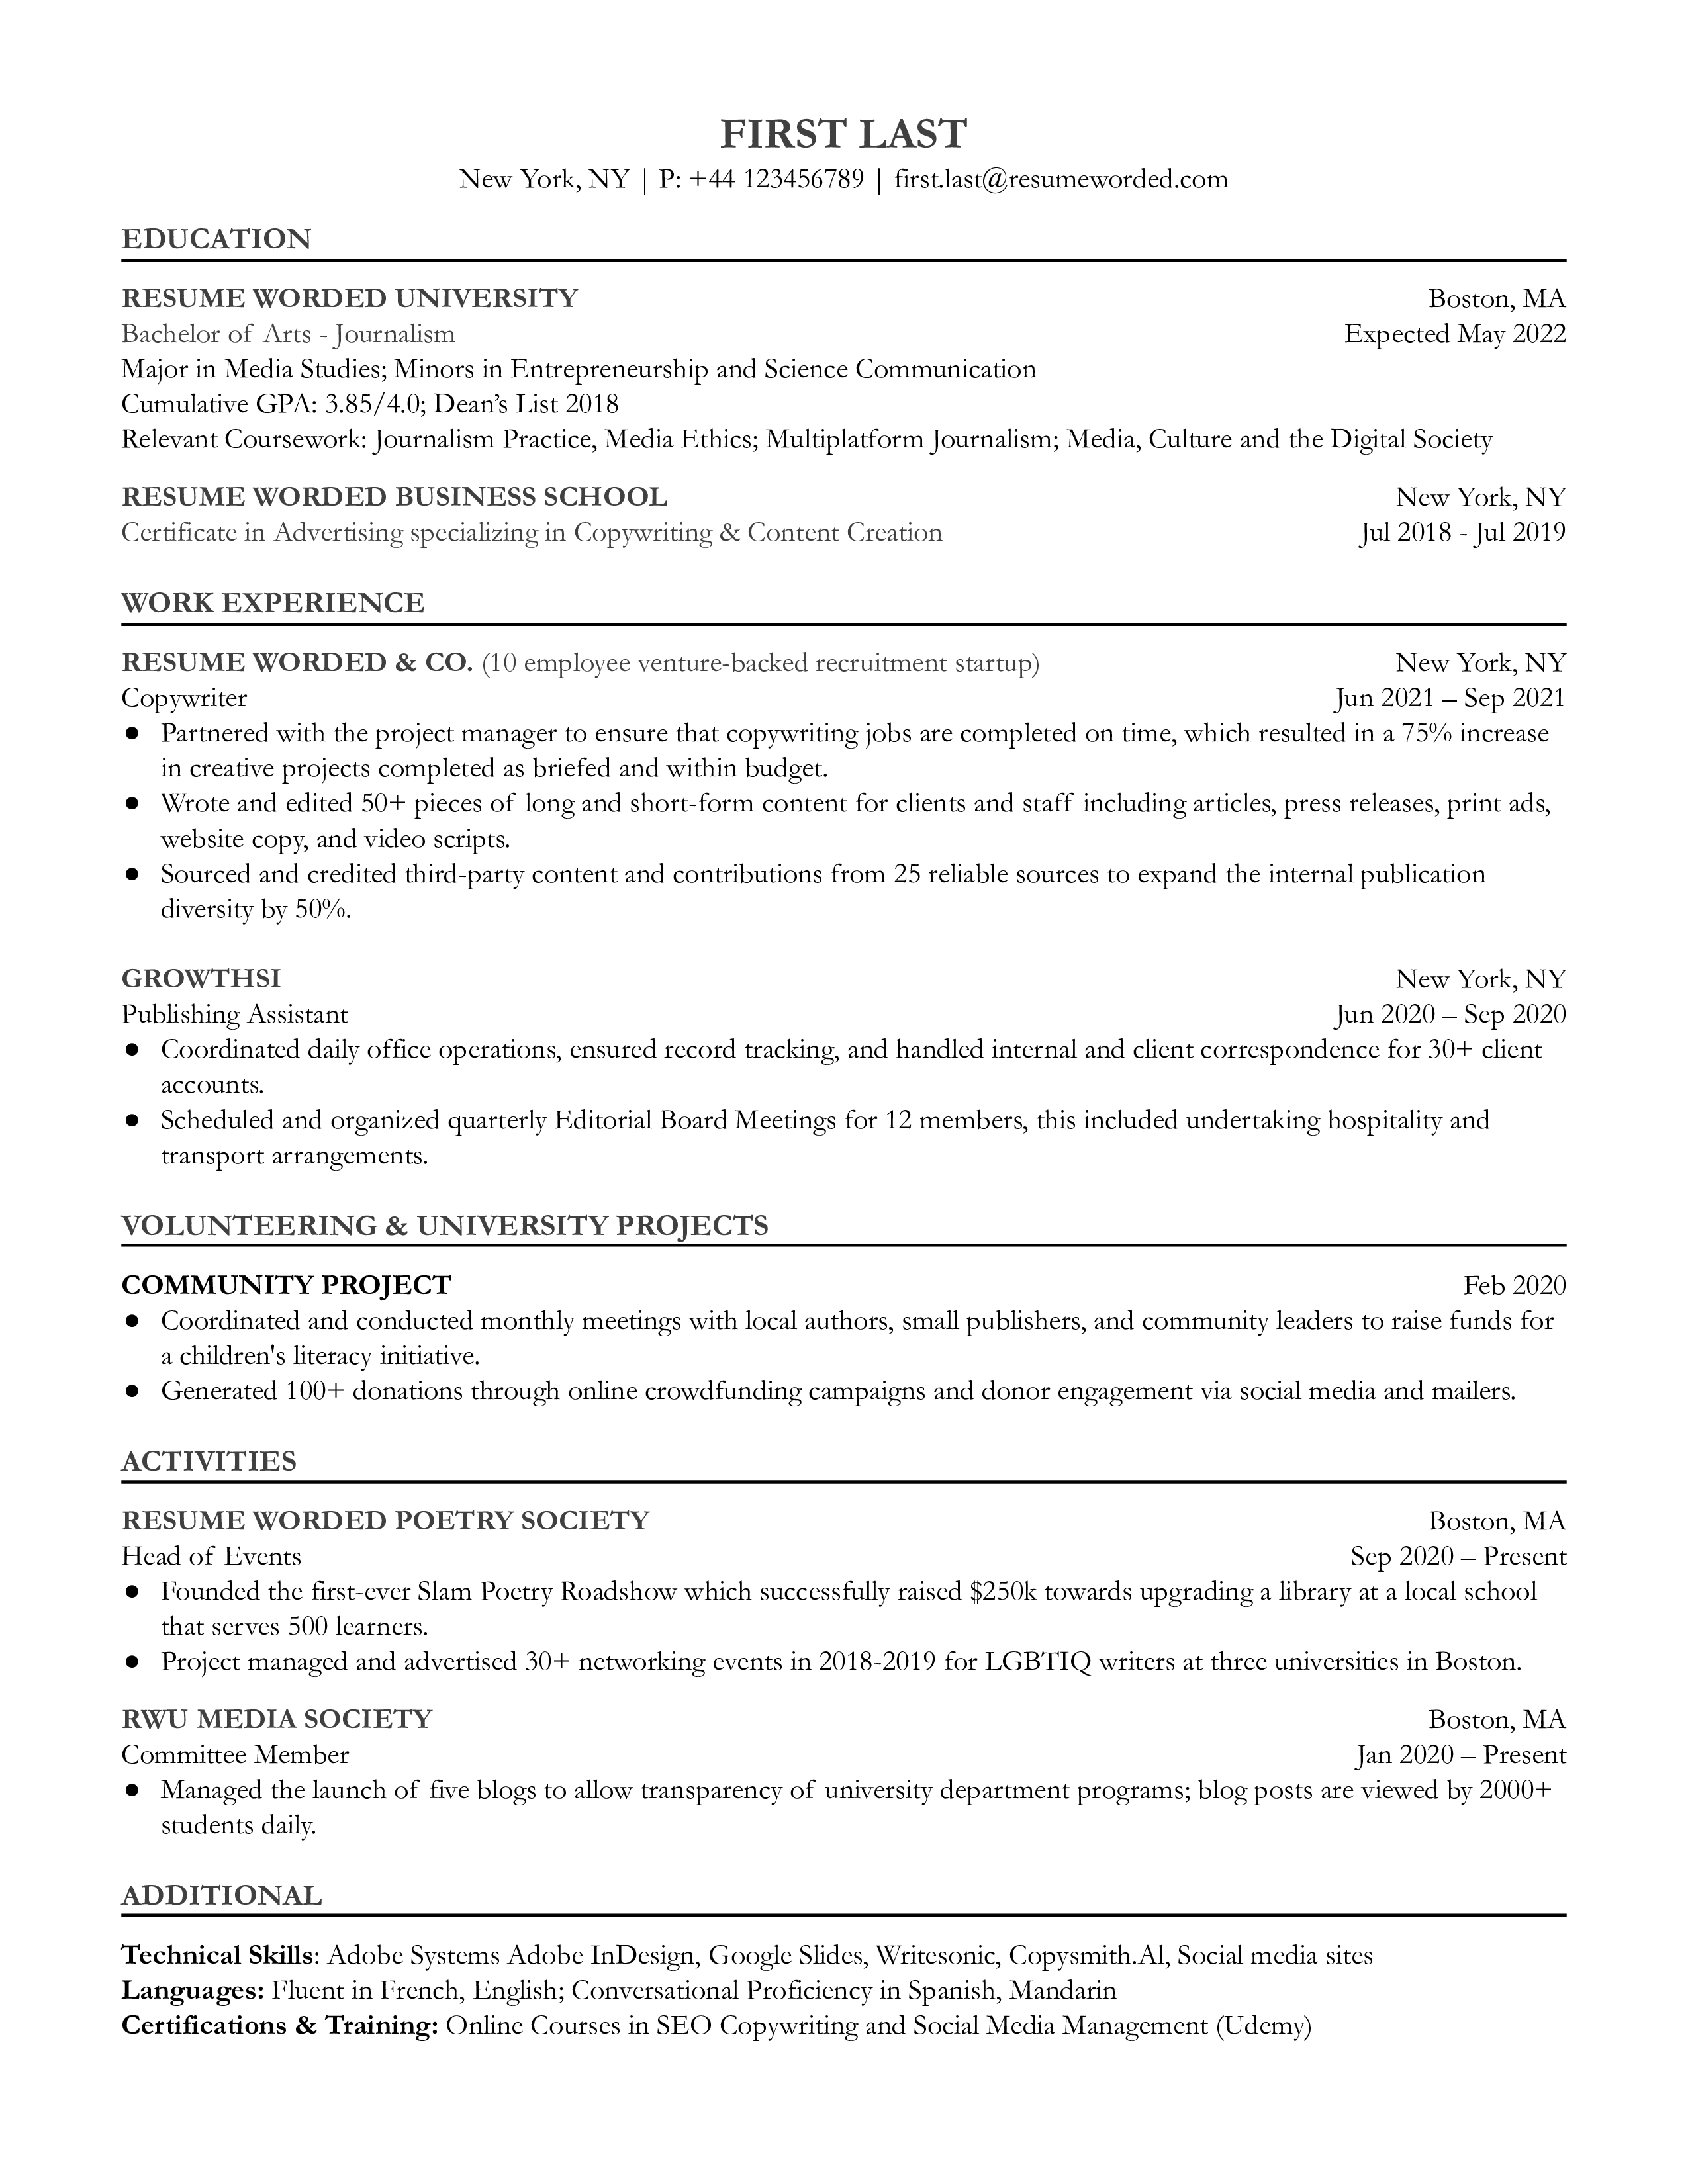 A junior copywriter sample resume that highlights educational and extra curricular background as well as copywriting success